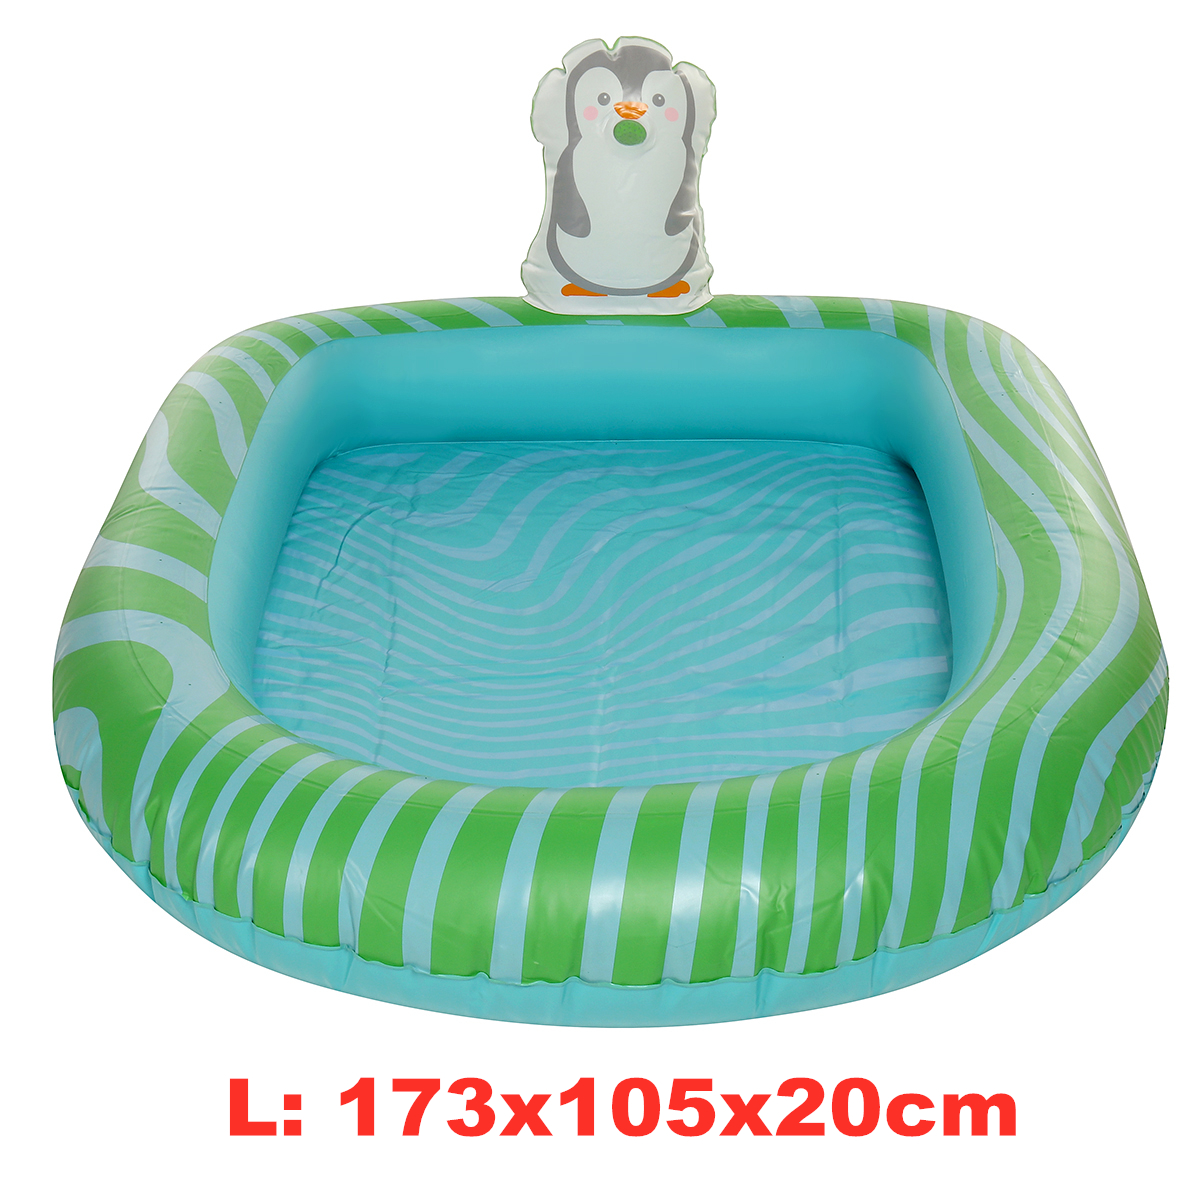 PVC-Children-Inflatable-Swimming-Pool-Sprinkler-Pool-Thickened-Cartoon-Pattern-Outdoor-Swimming-Wate-1851764-10